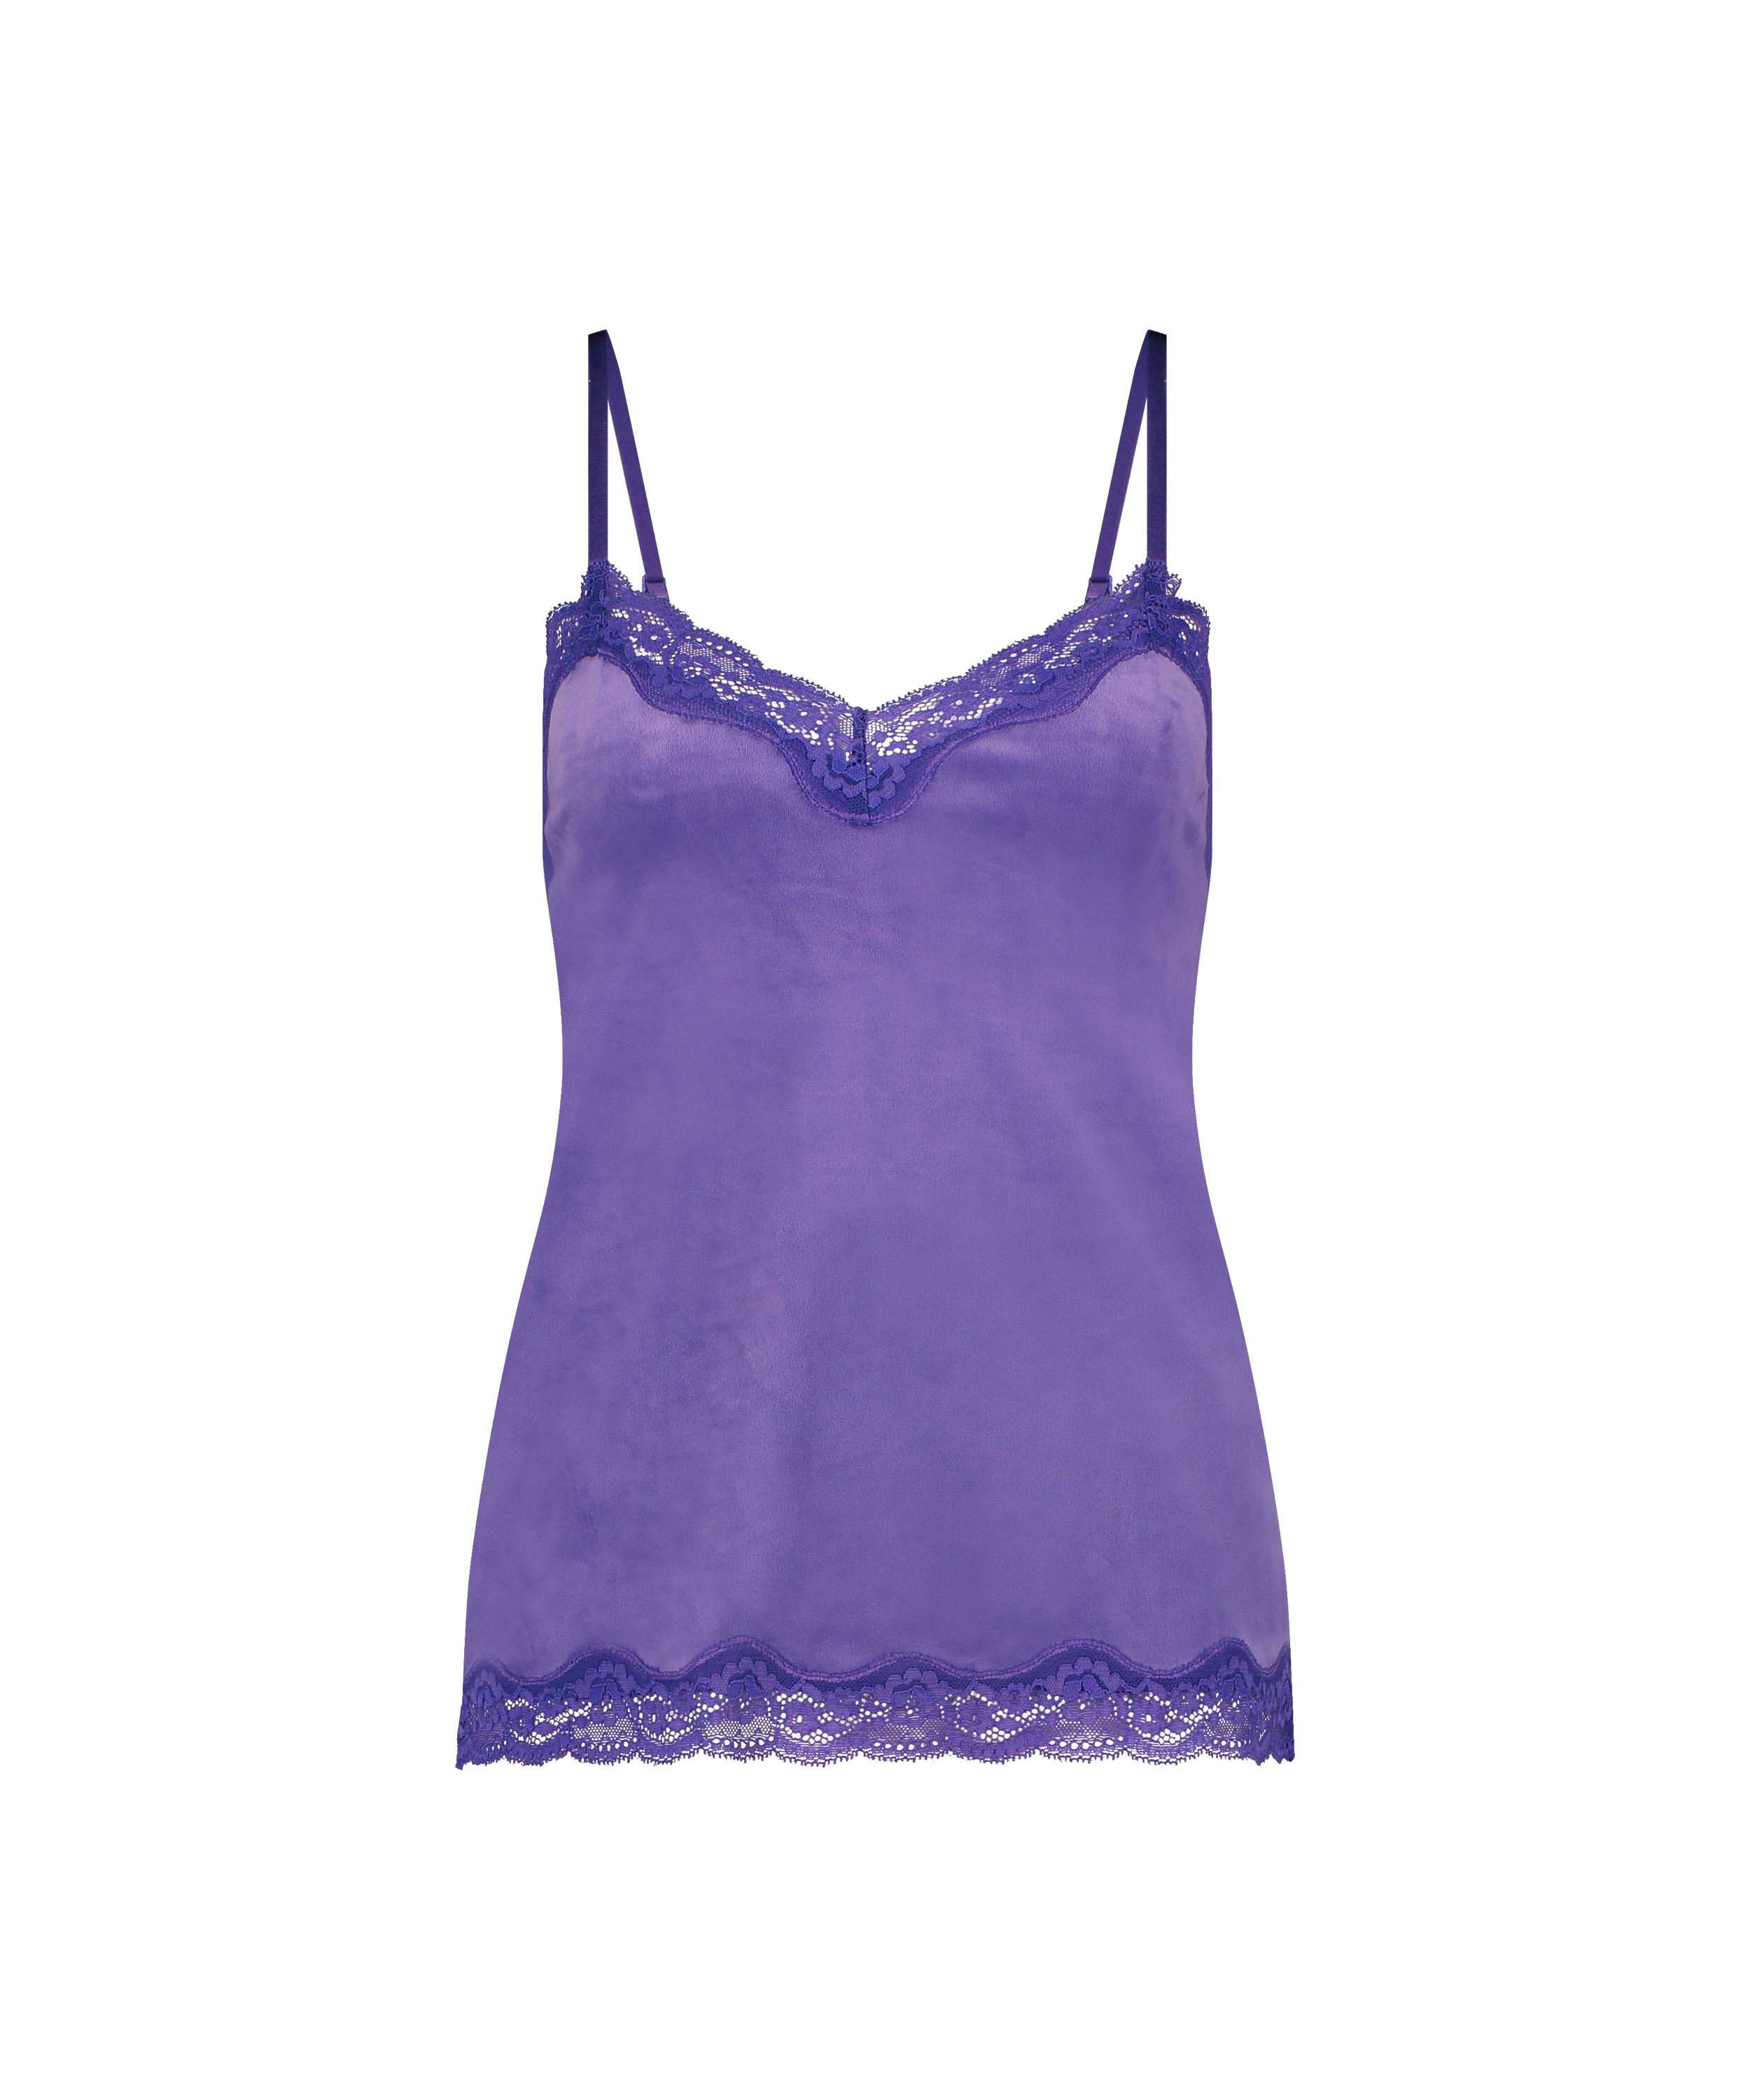 Cami Top Velours Lace, Lila, main